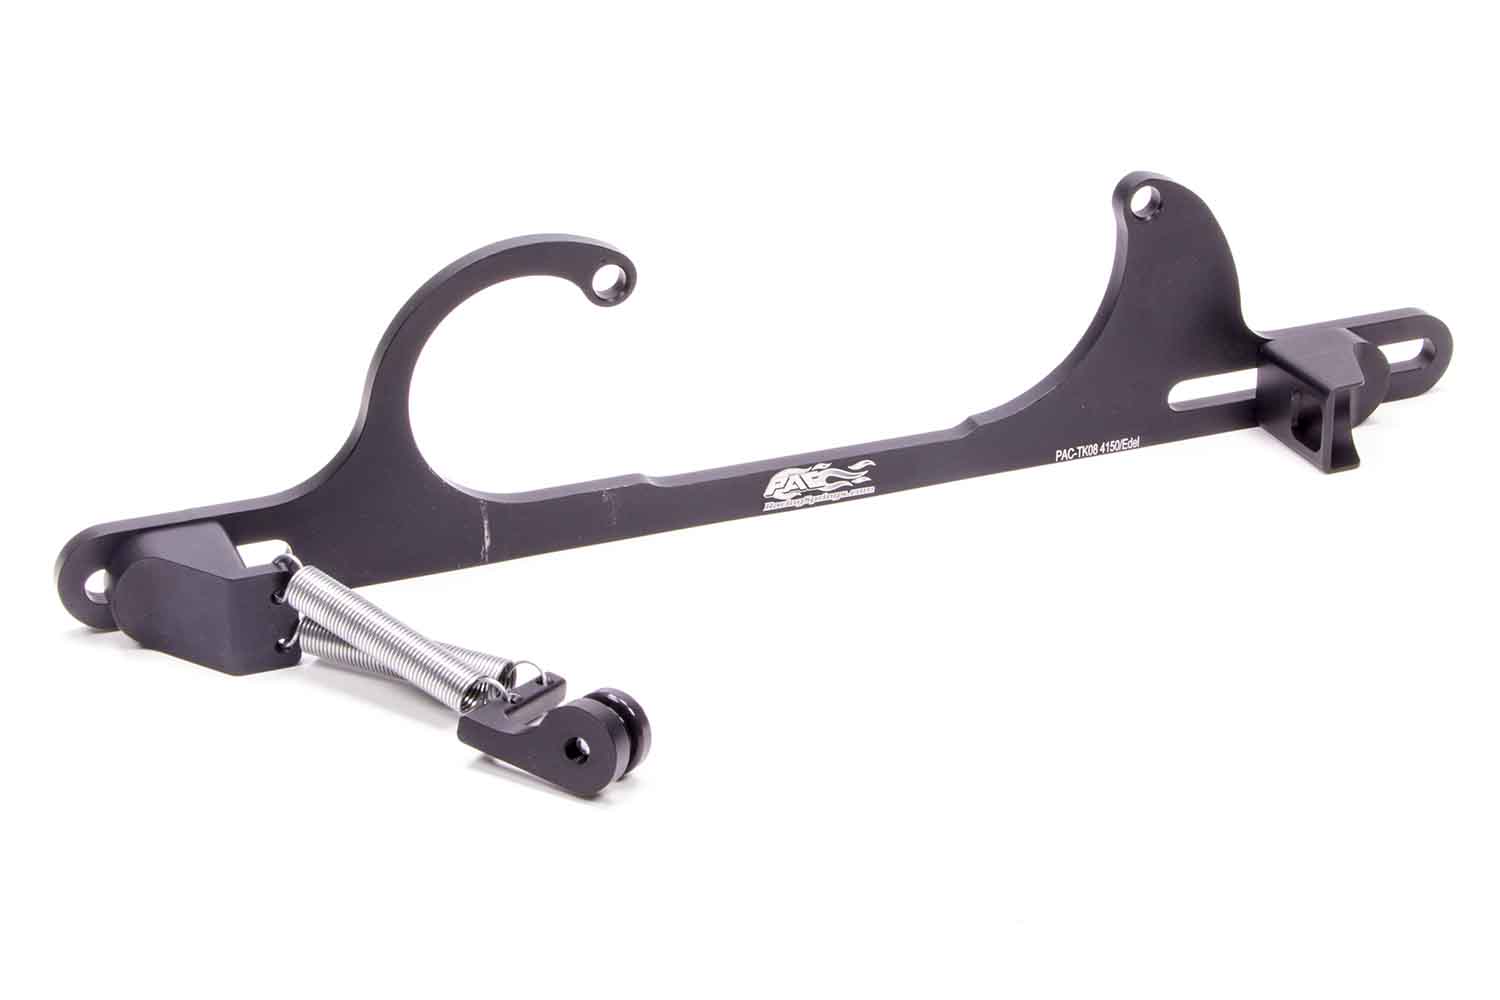 Racing Power R9619 Throttle Cable Bracket